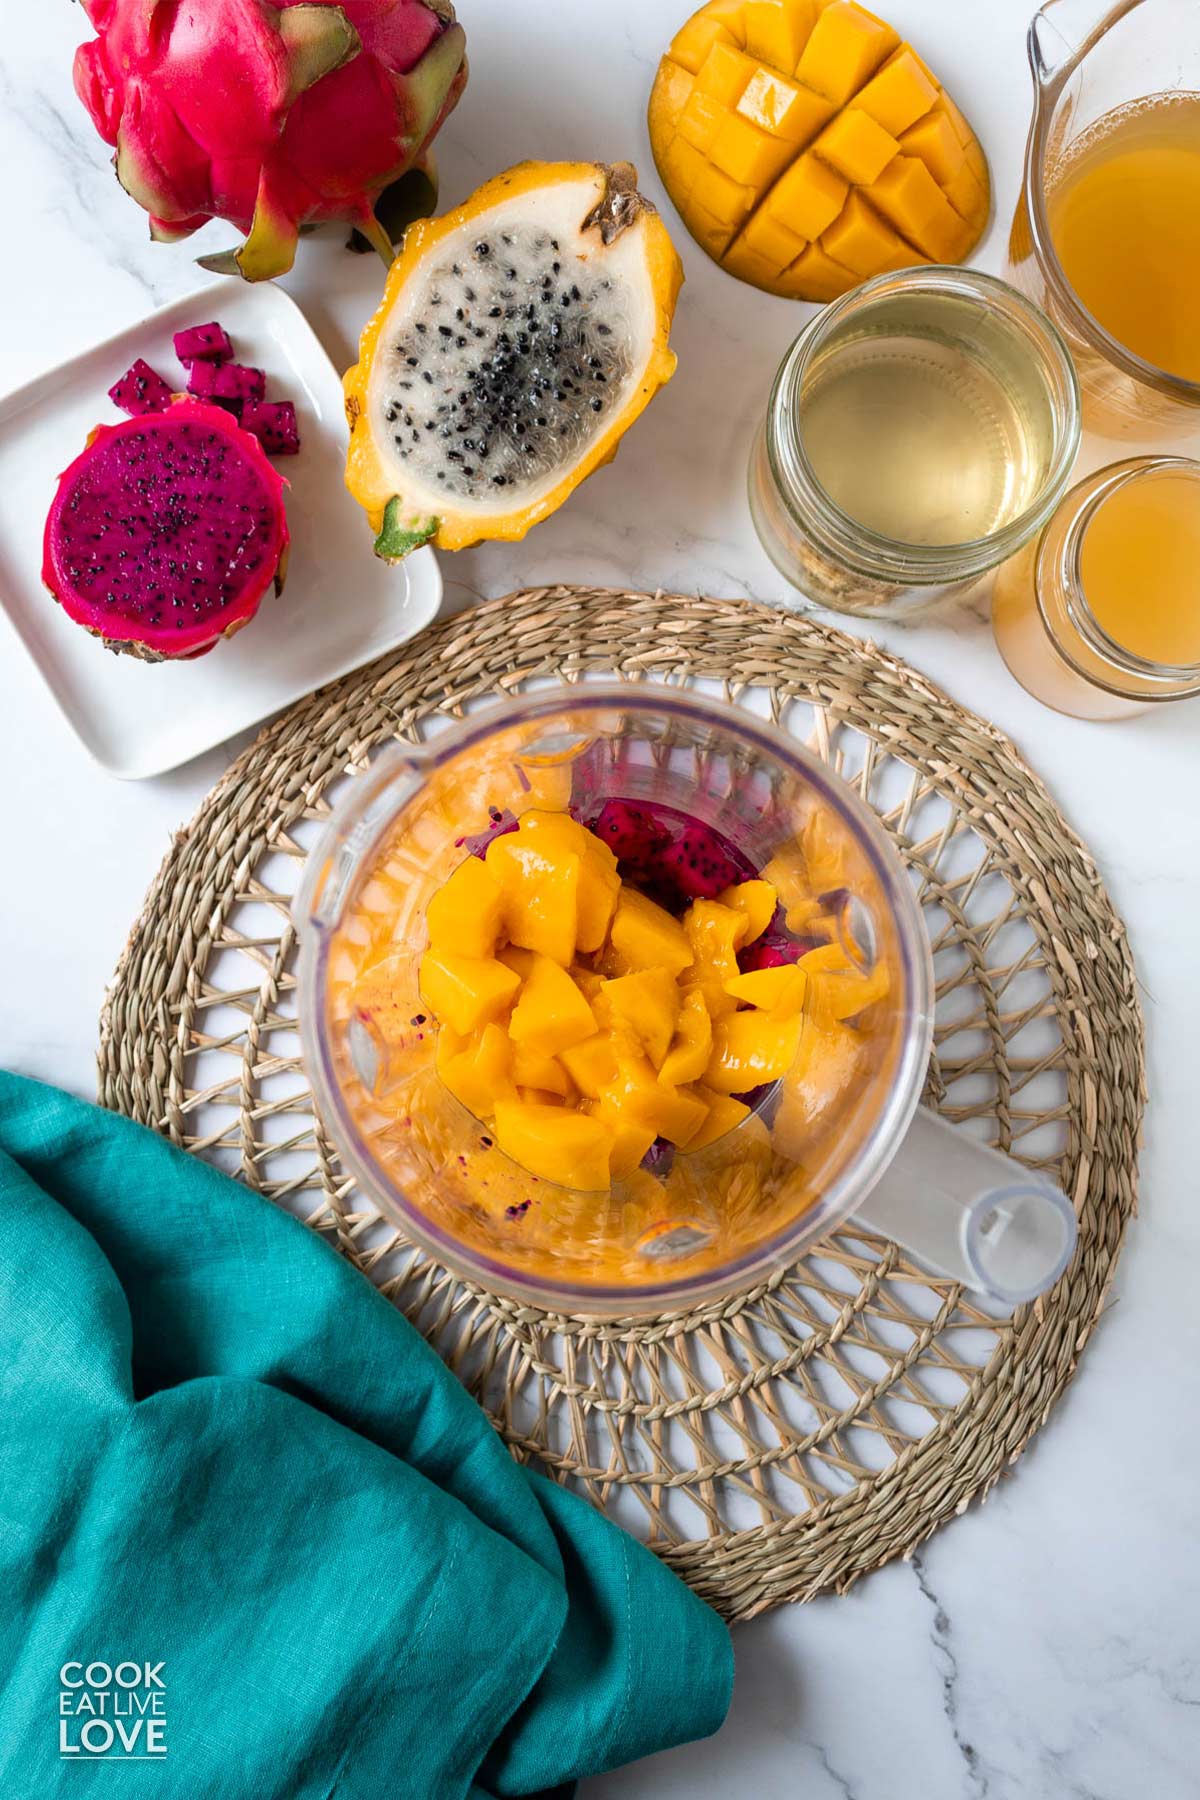 Ingredients to make dragon fruit mango drink on the table.